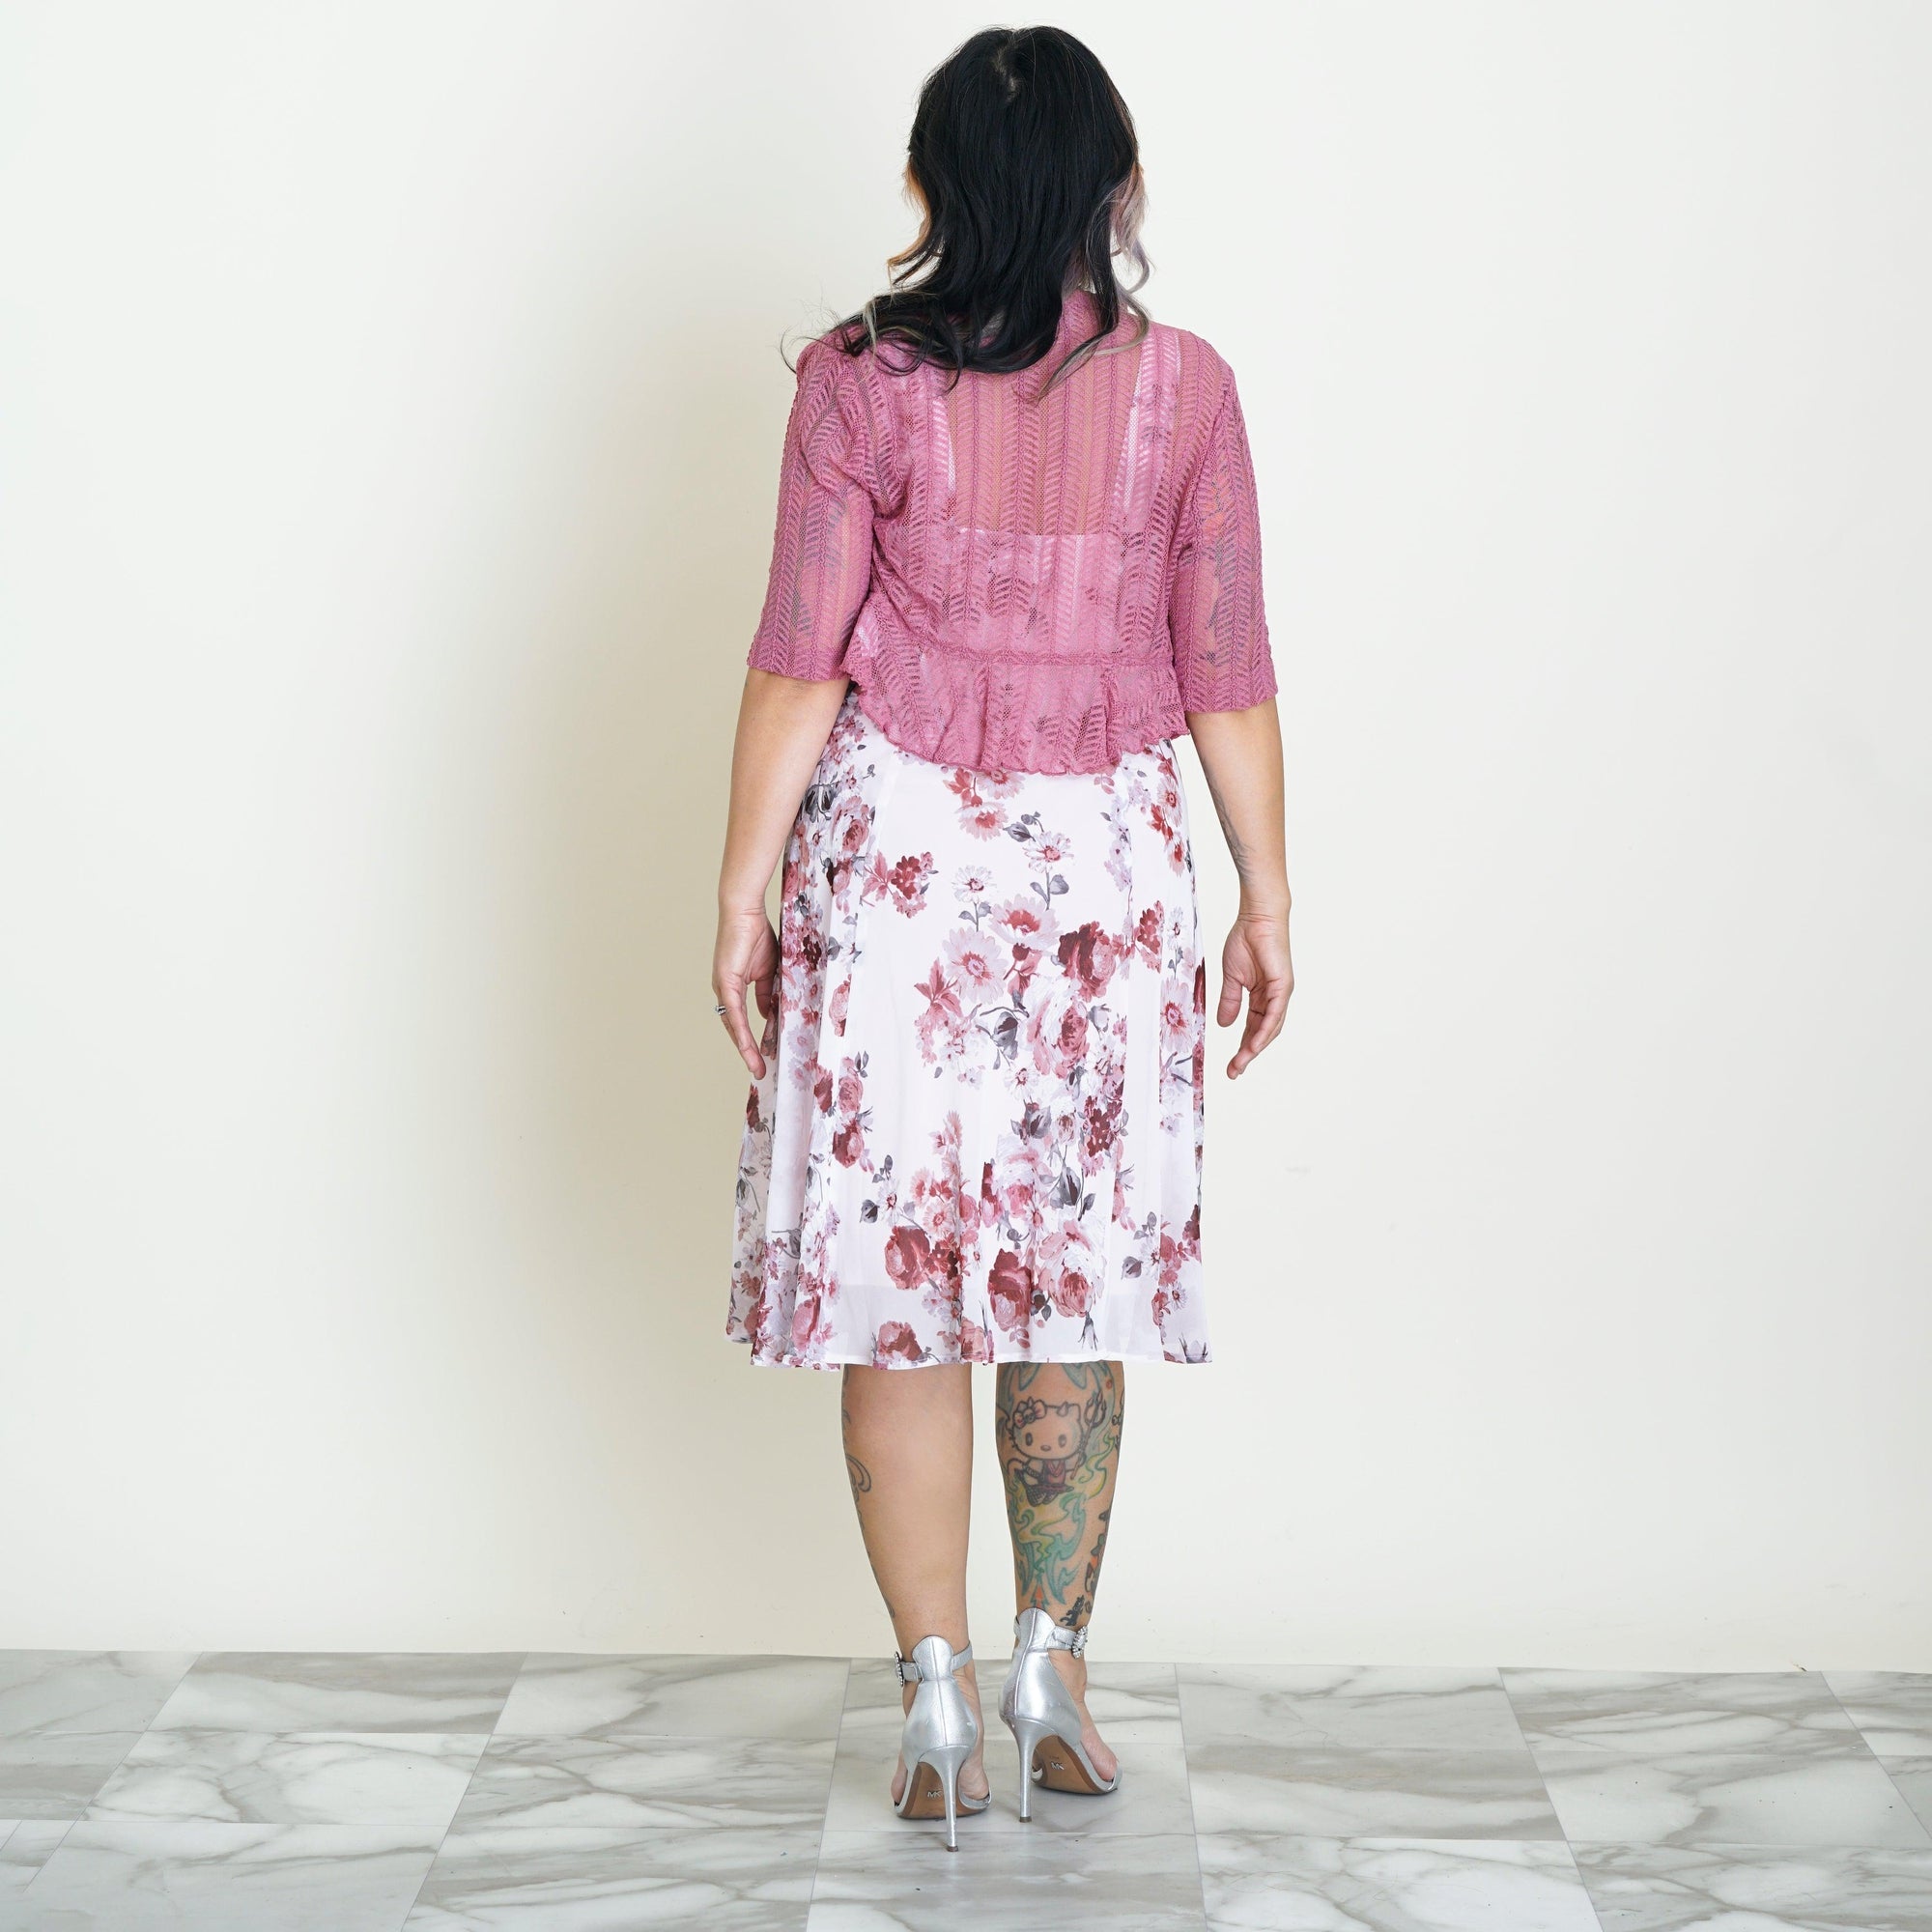 Woman posing wearing Rosewood Mary Rosewood Floral Chiffon Dress with Shrug from Connected Apparel